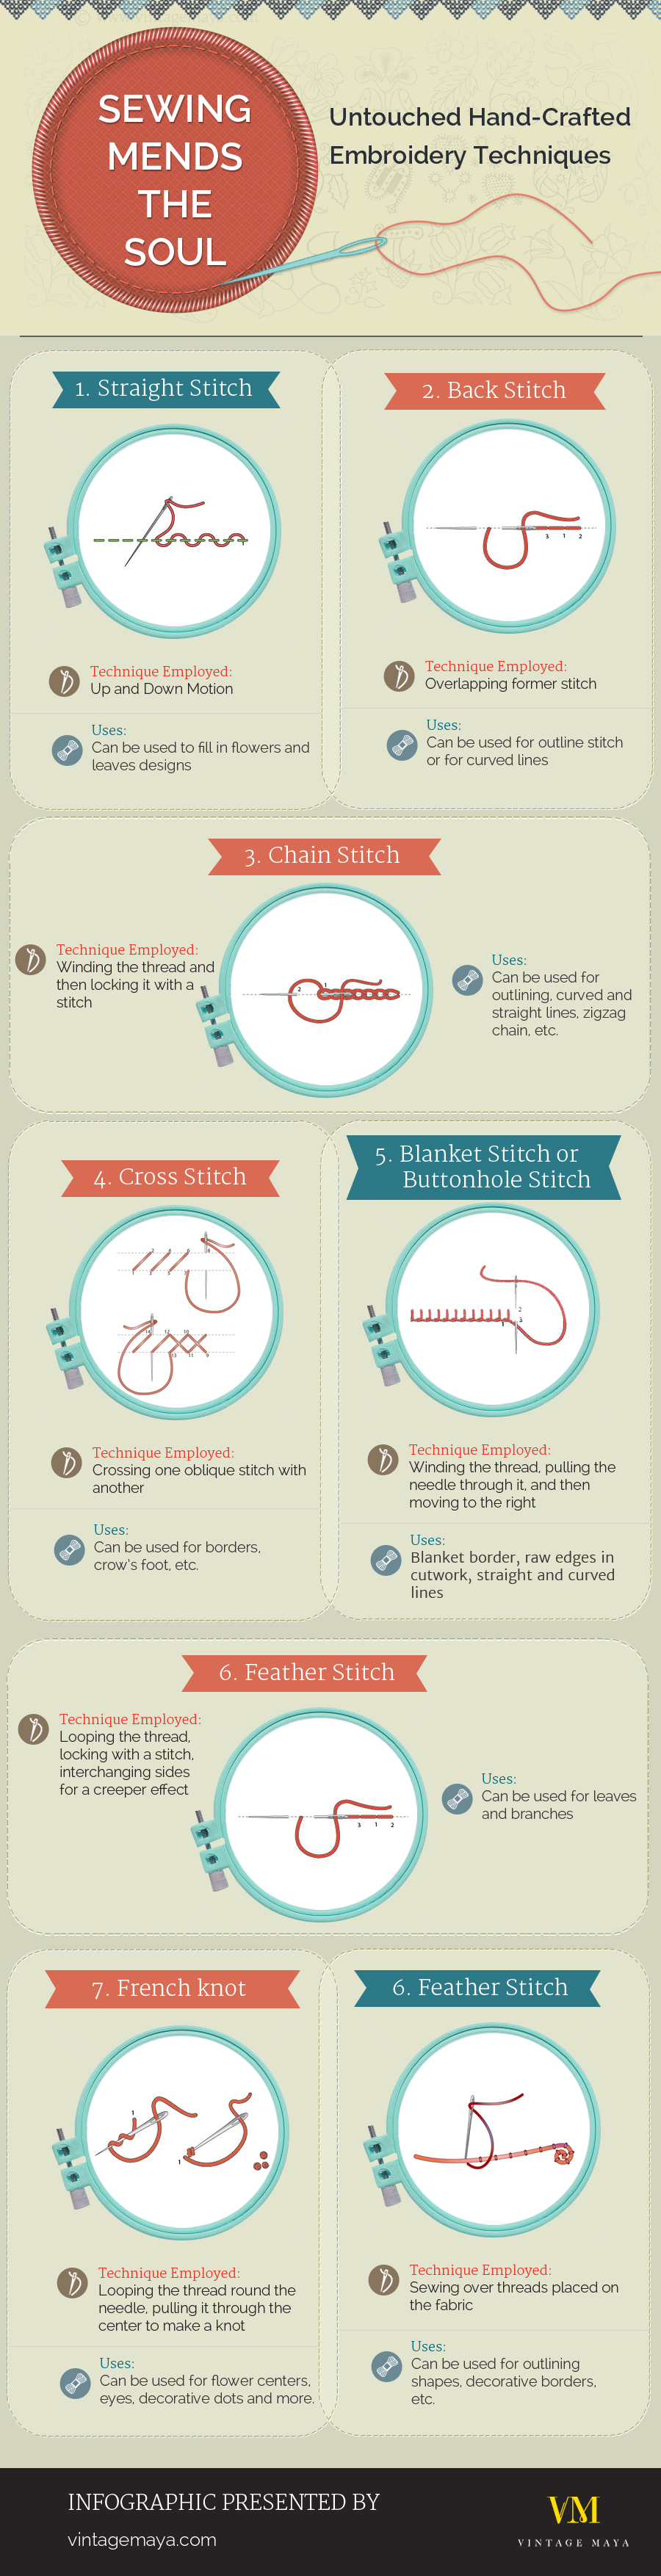 An Infographic on hand-crafted embroidery techniques